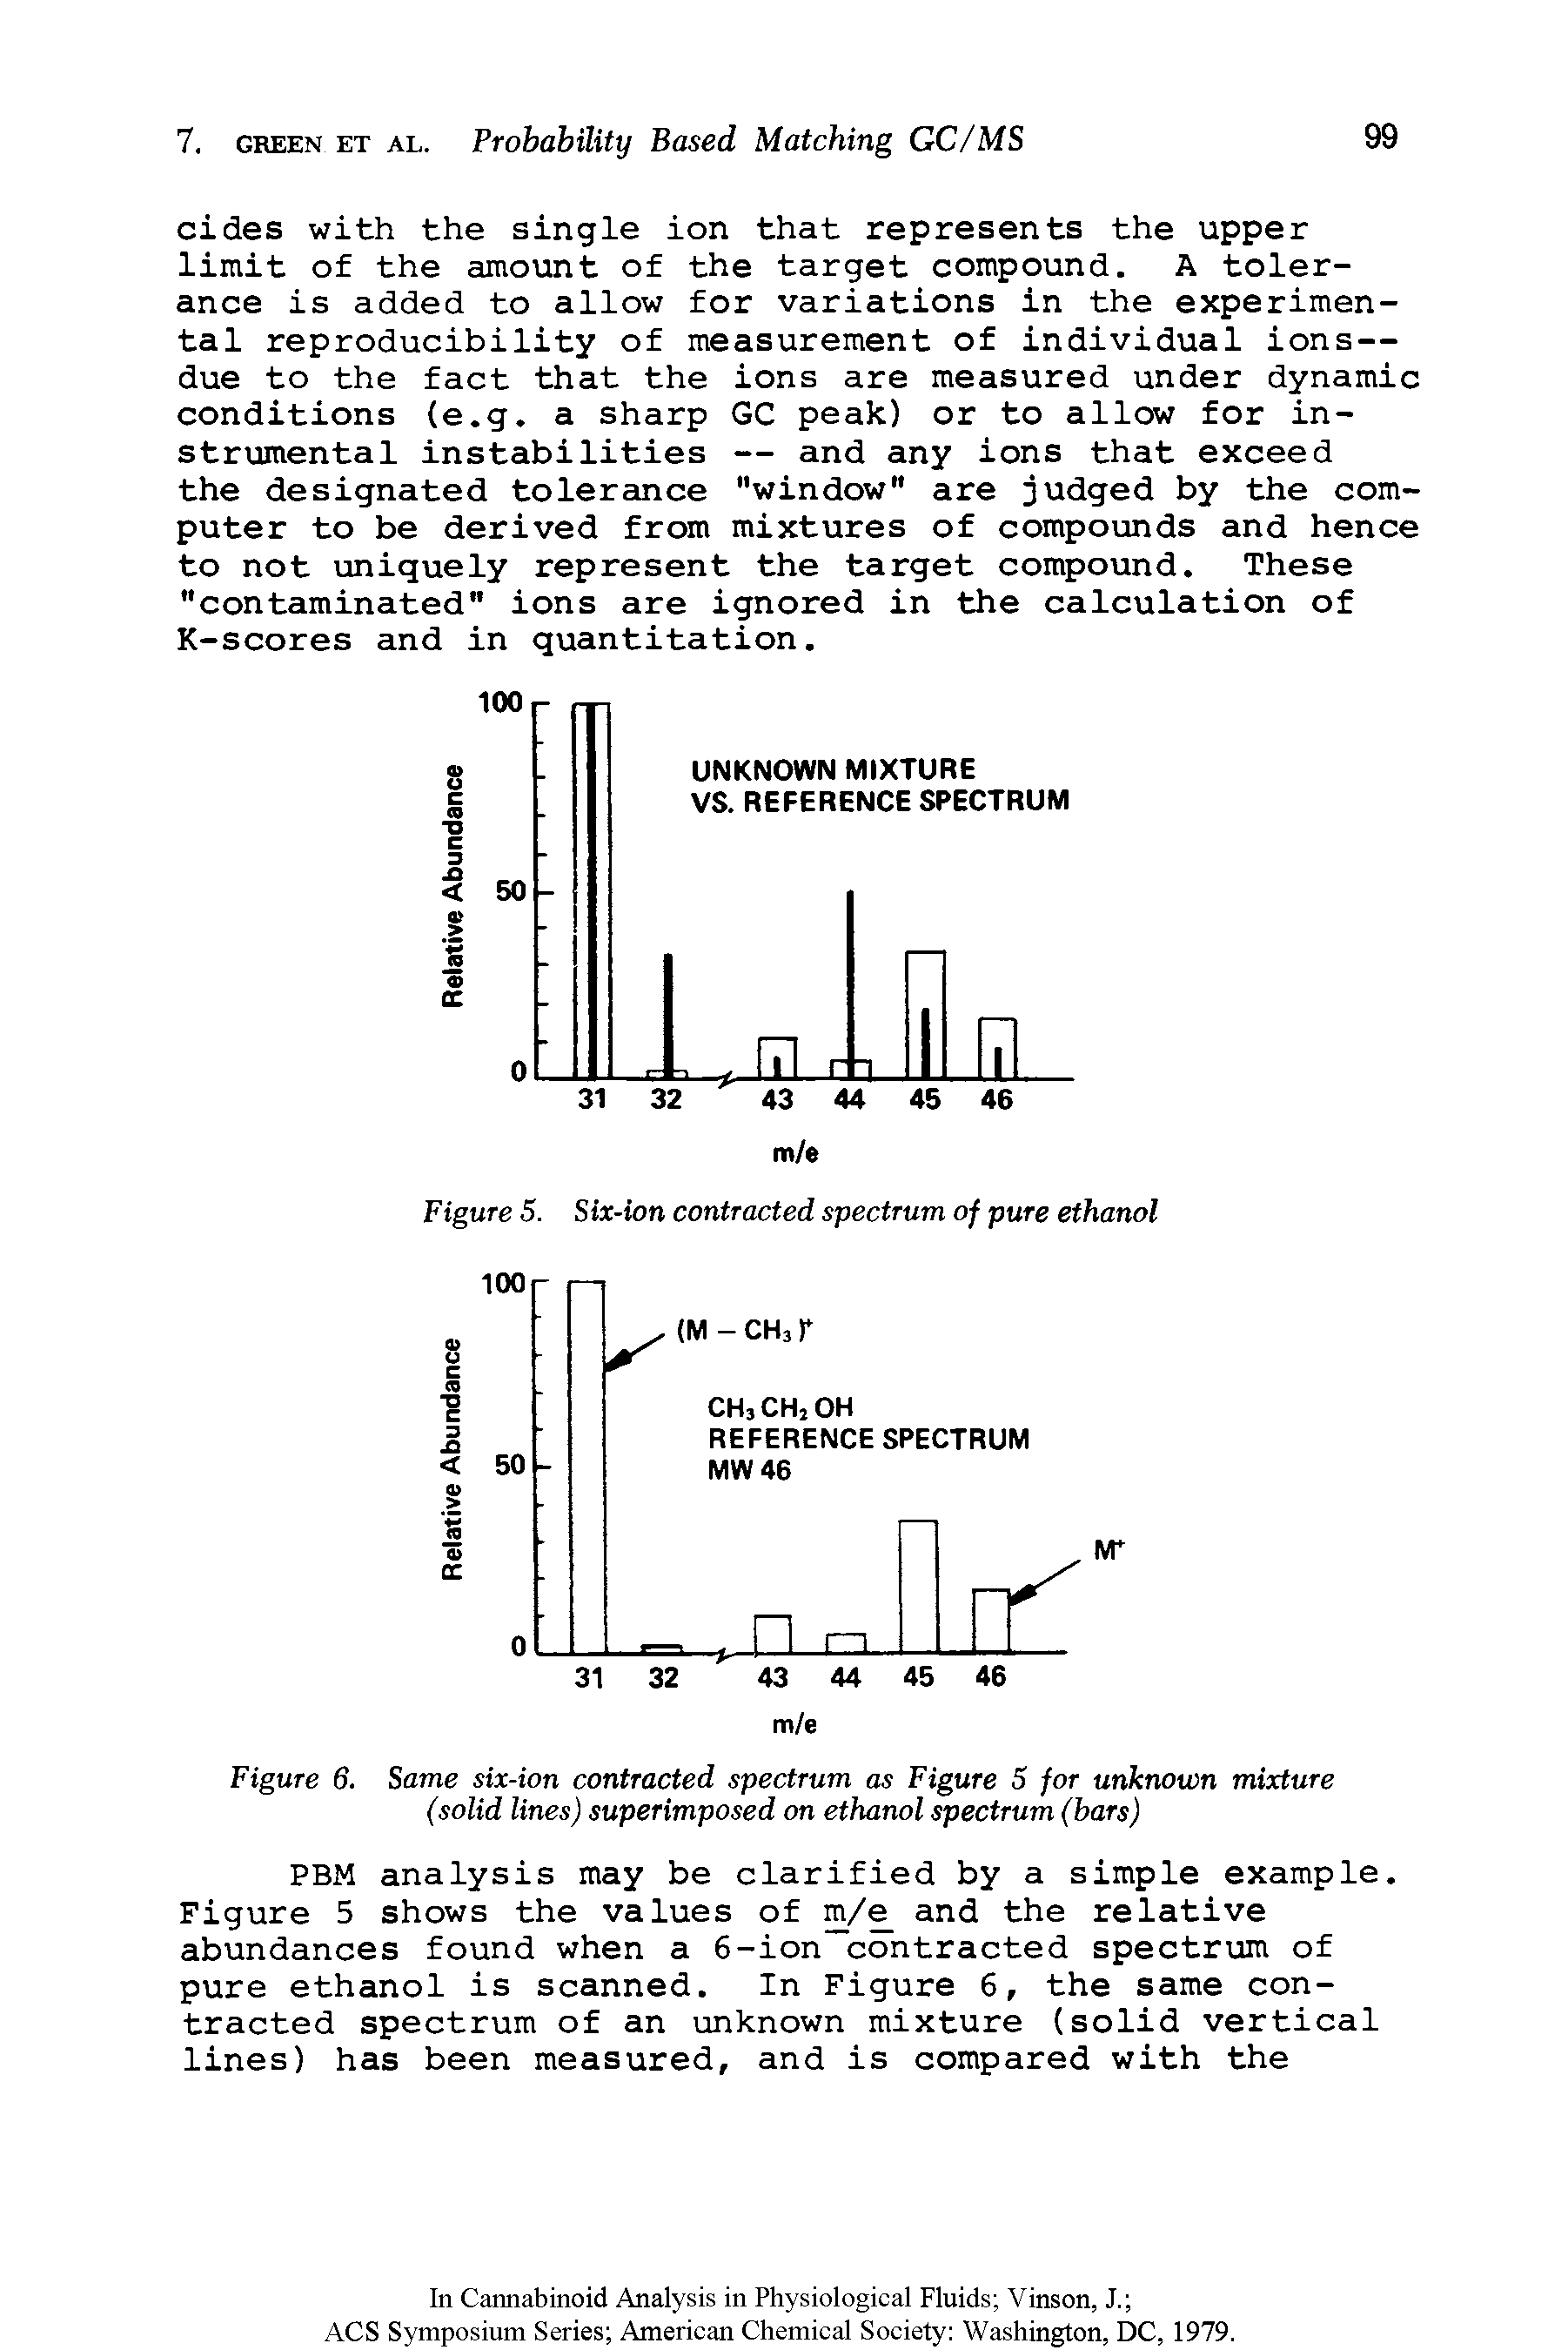 Figure 6. Same six-ion contracted spectrum as Figure 5 for unknown mixture (solid lines) superimposed on ethanol spectrum (bars)...